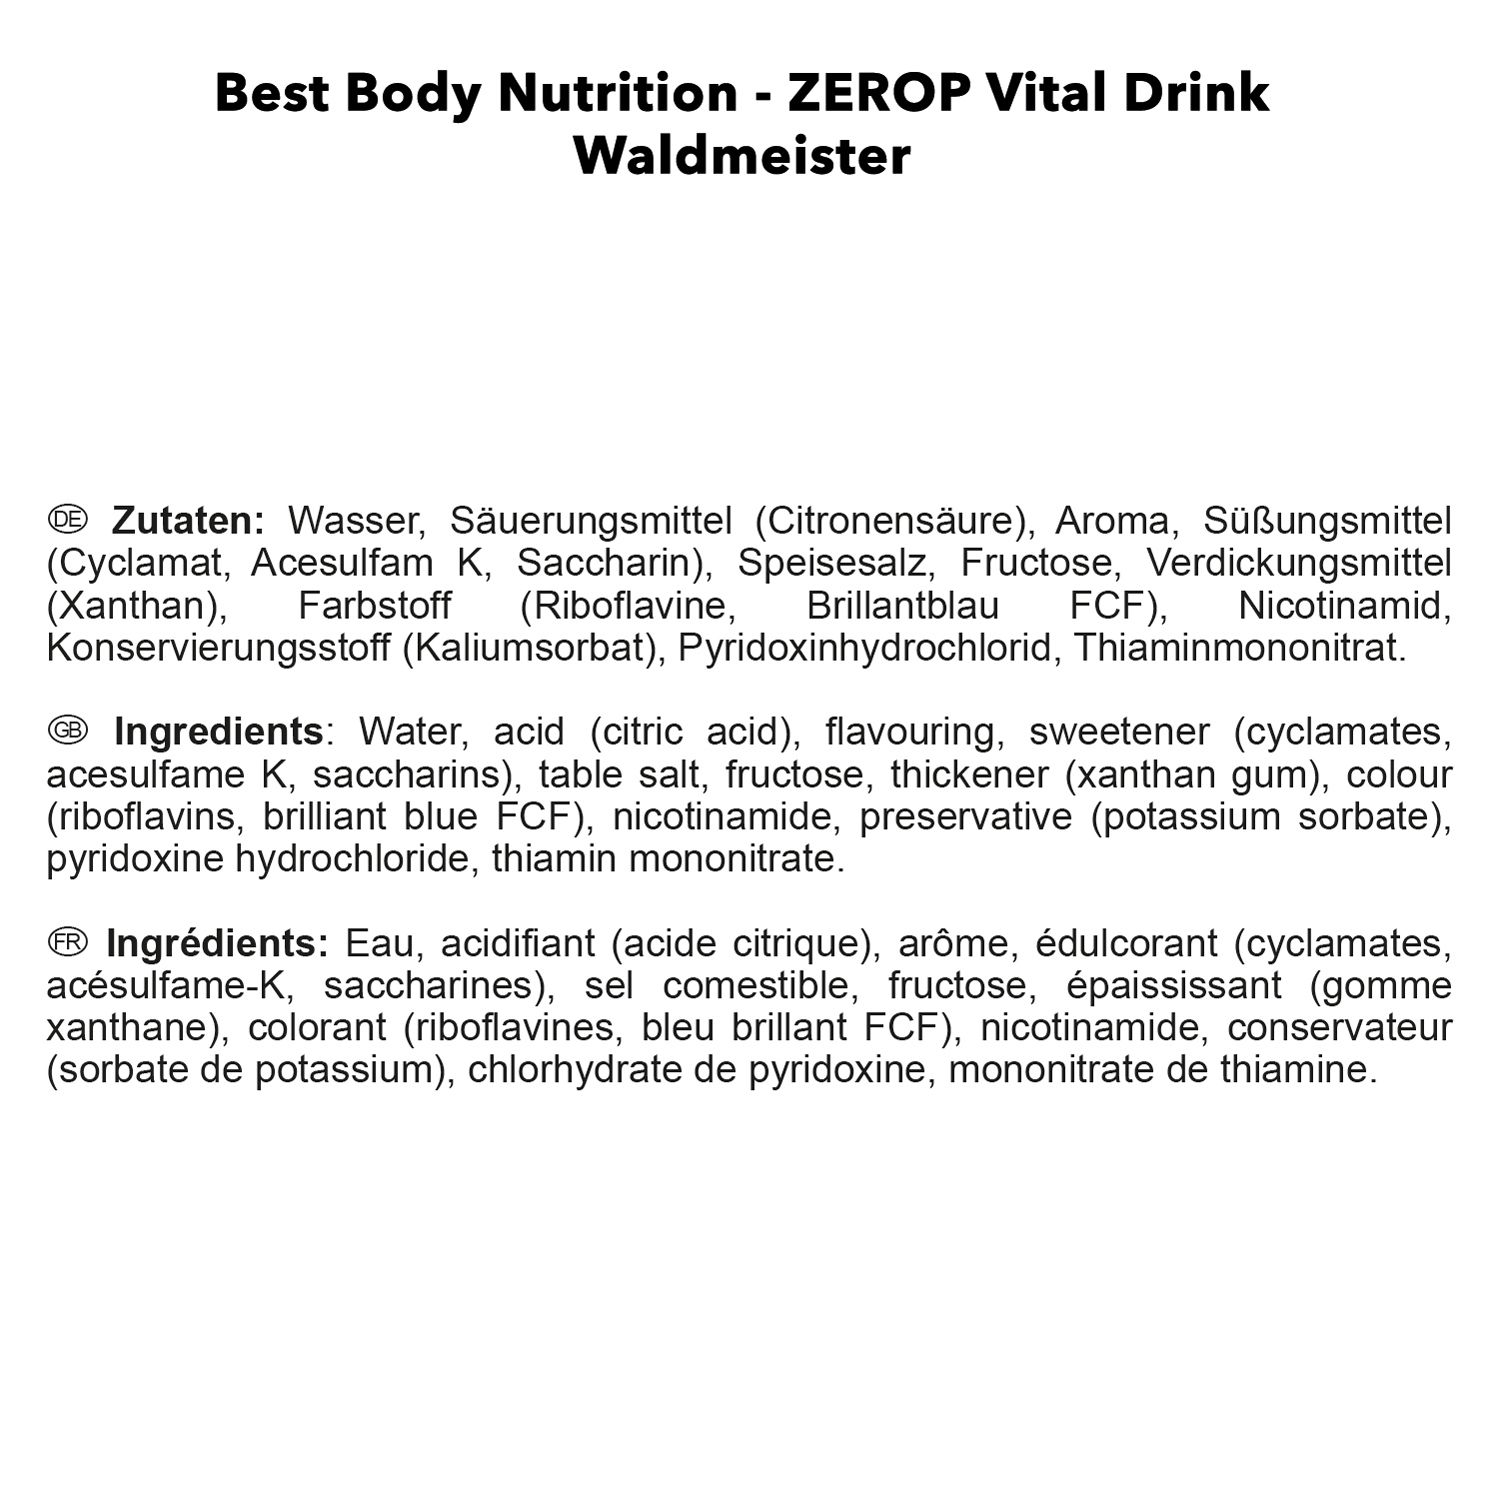 Best Body Nutrition Low Carb Vital Drink Waldmeister